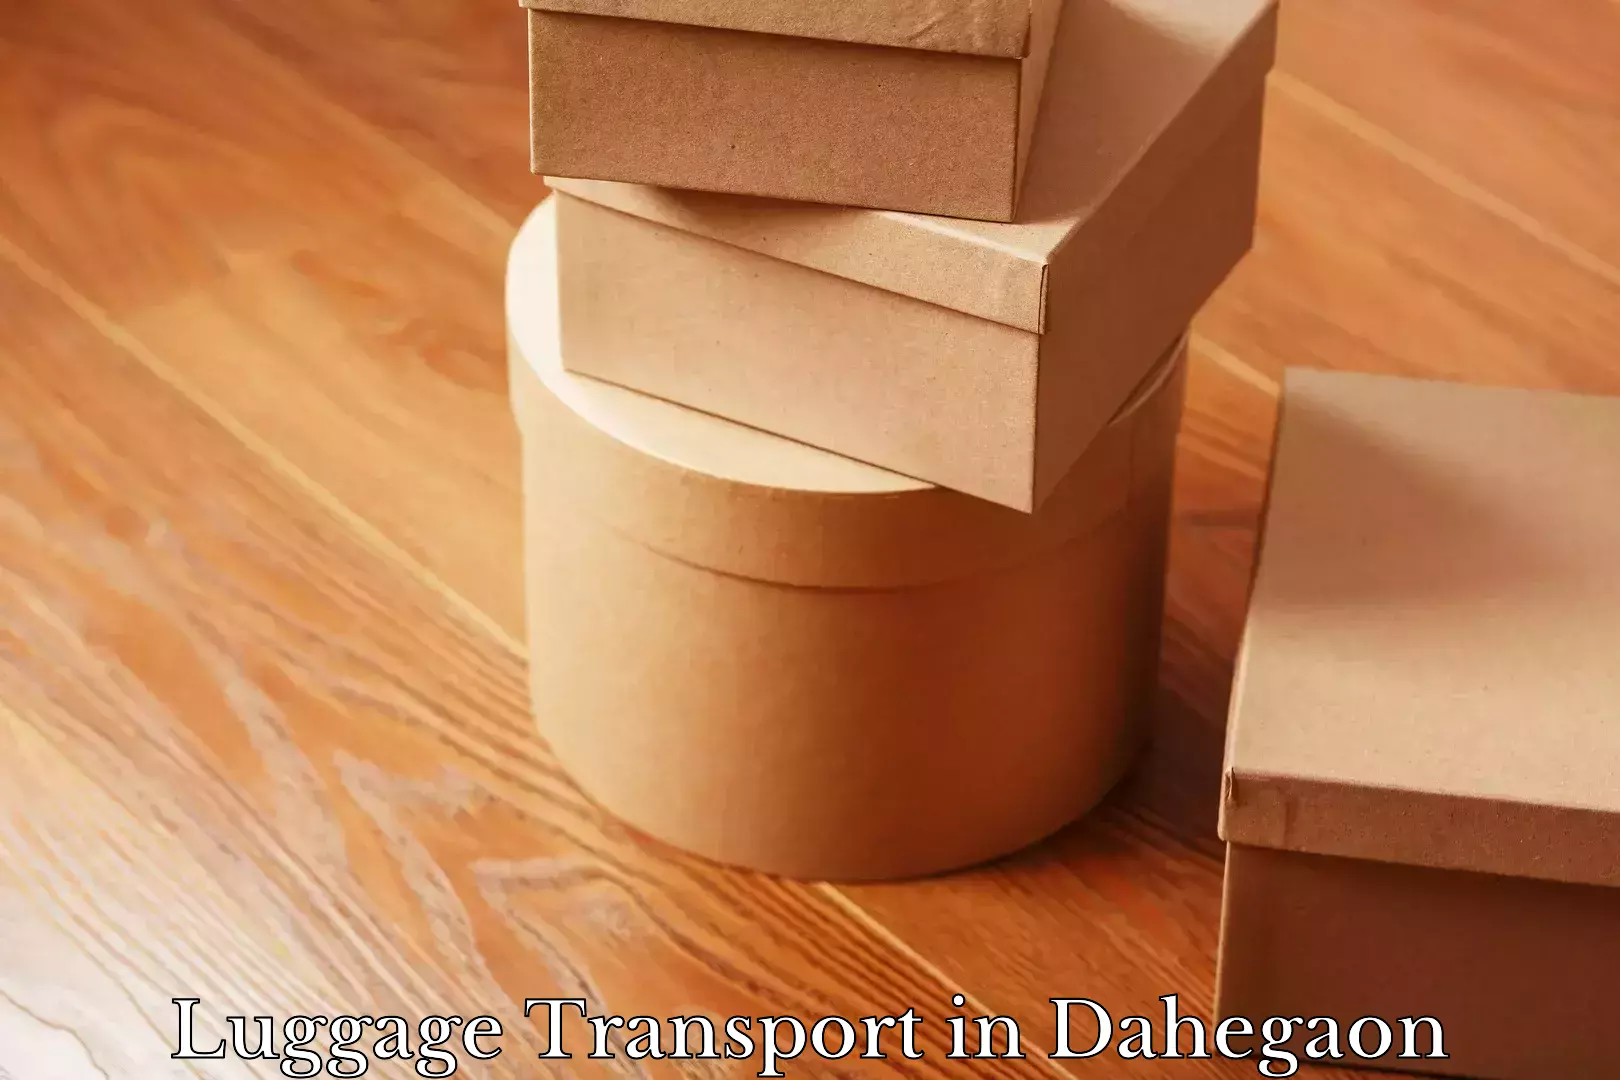 Luggage shipping planner in Dahegaon